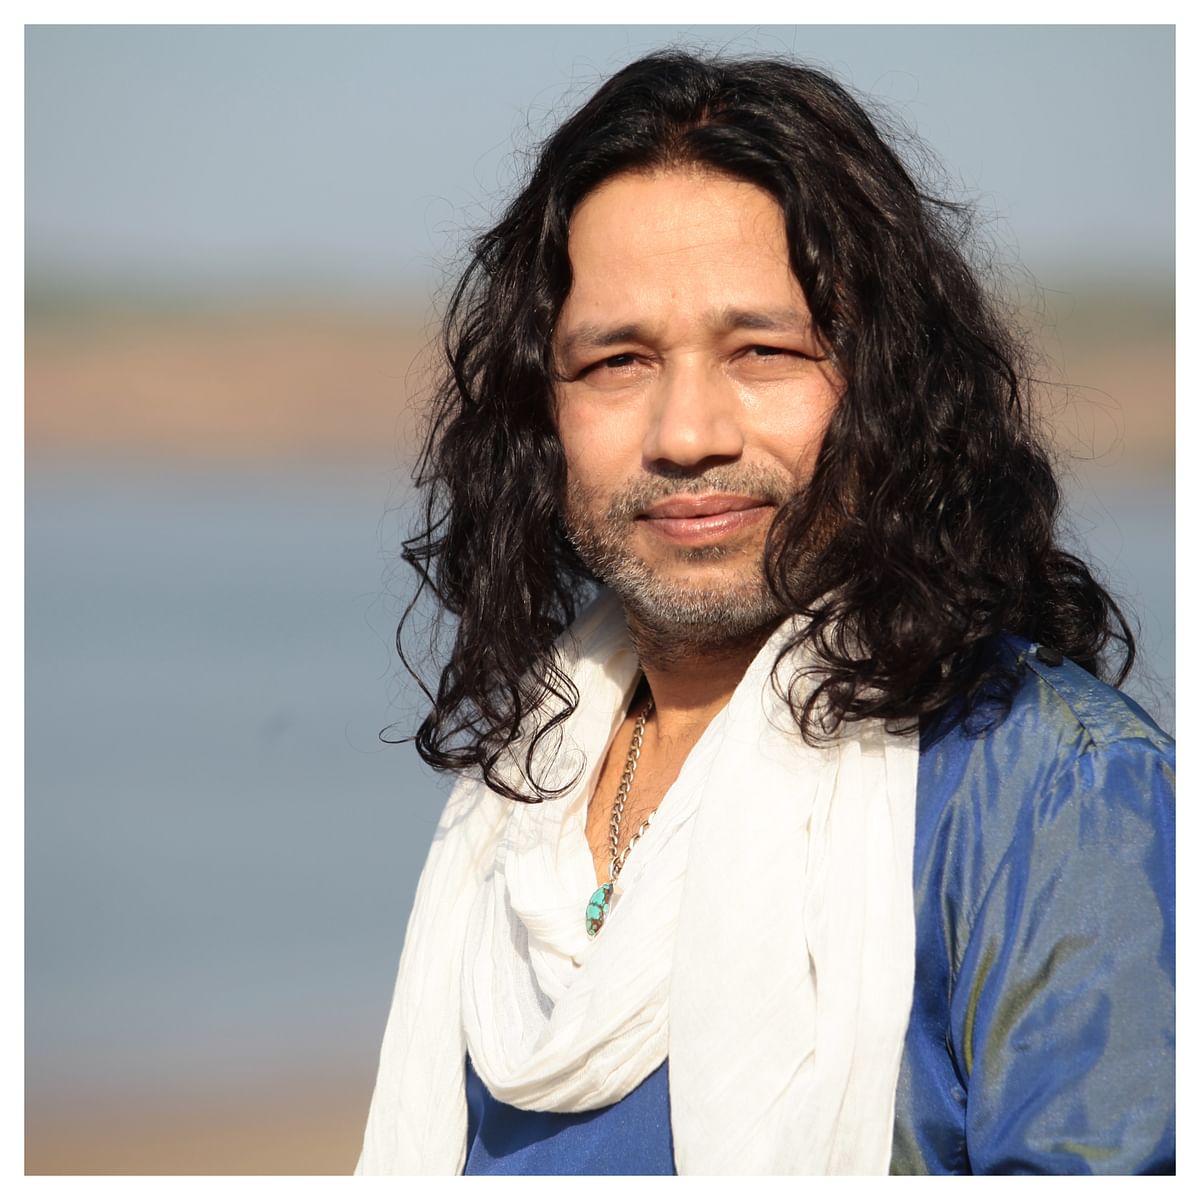 My birthday is all about discovering upcoming talents: Kailash Kher